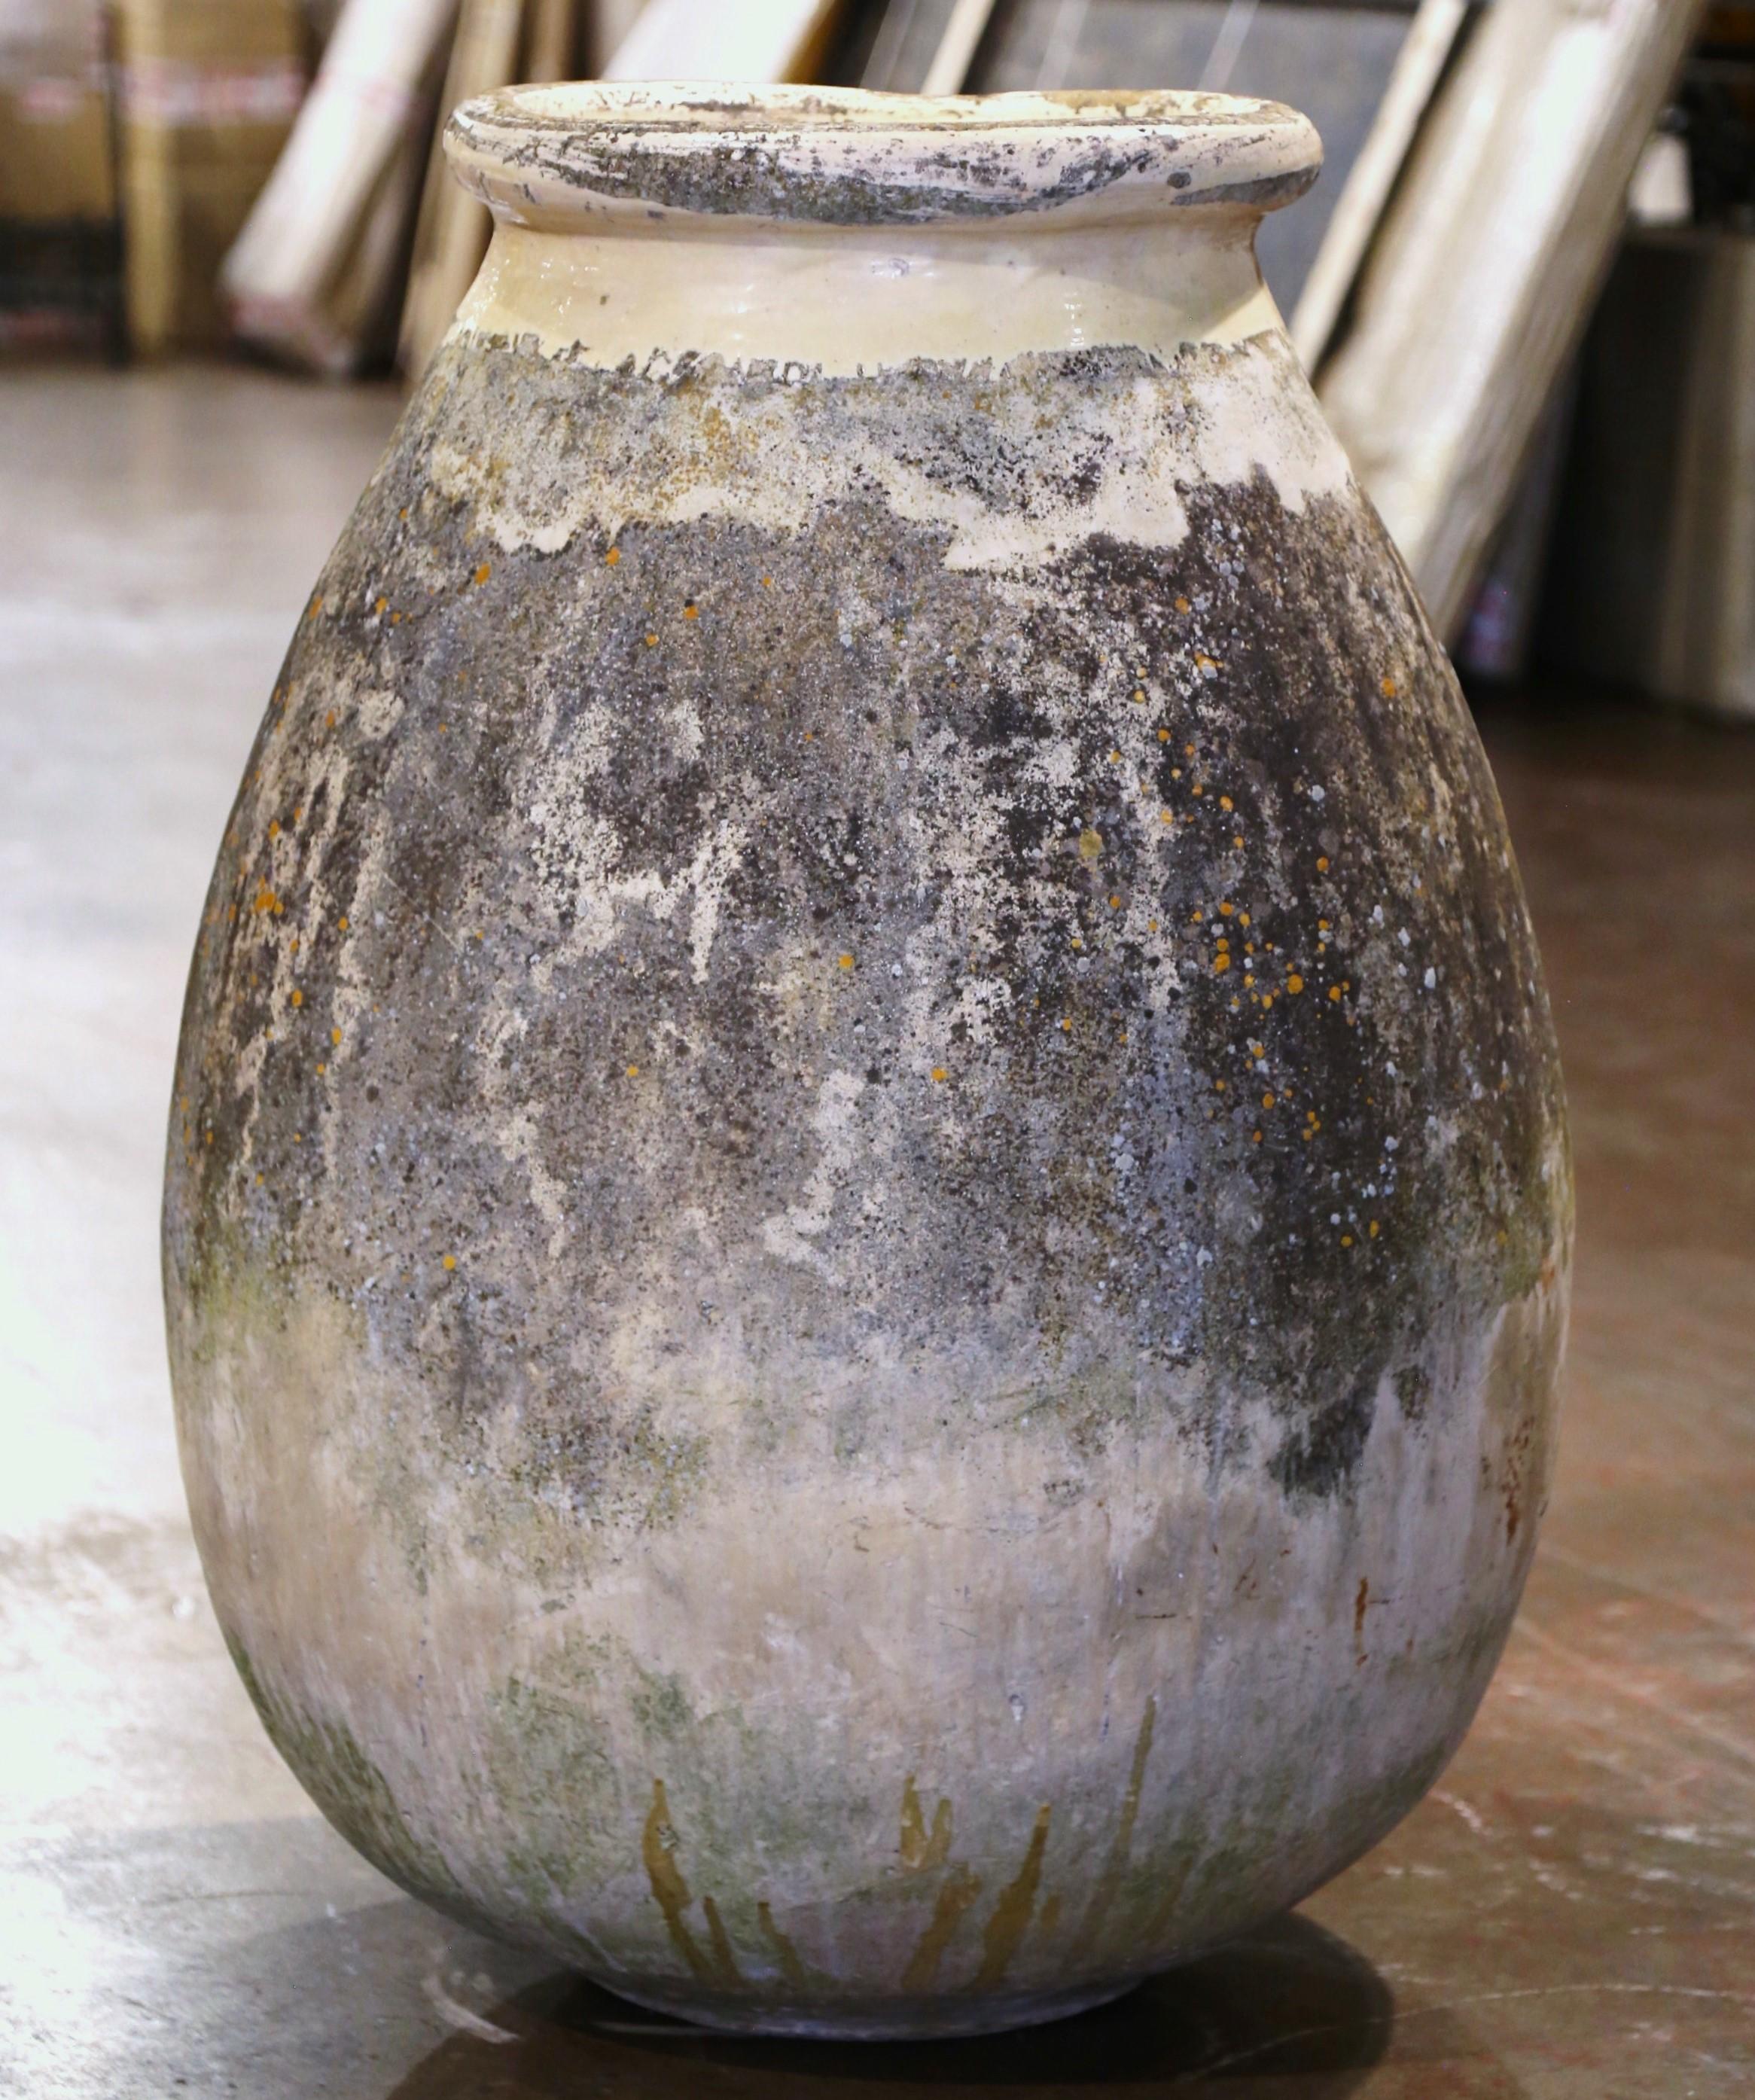 This large, antique earthenware olive jar was created in Biot, Provence, Southern France, circa 1760. Made of blond clay and neutral in color, the terracotta vessel has a traditional round bulbous shape. The rustic, time-worn pot features a pale